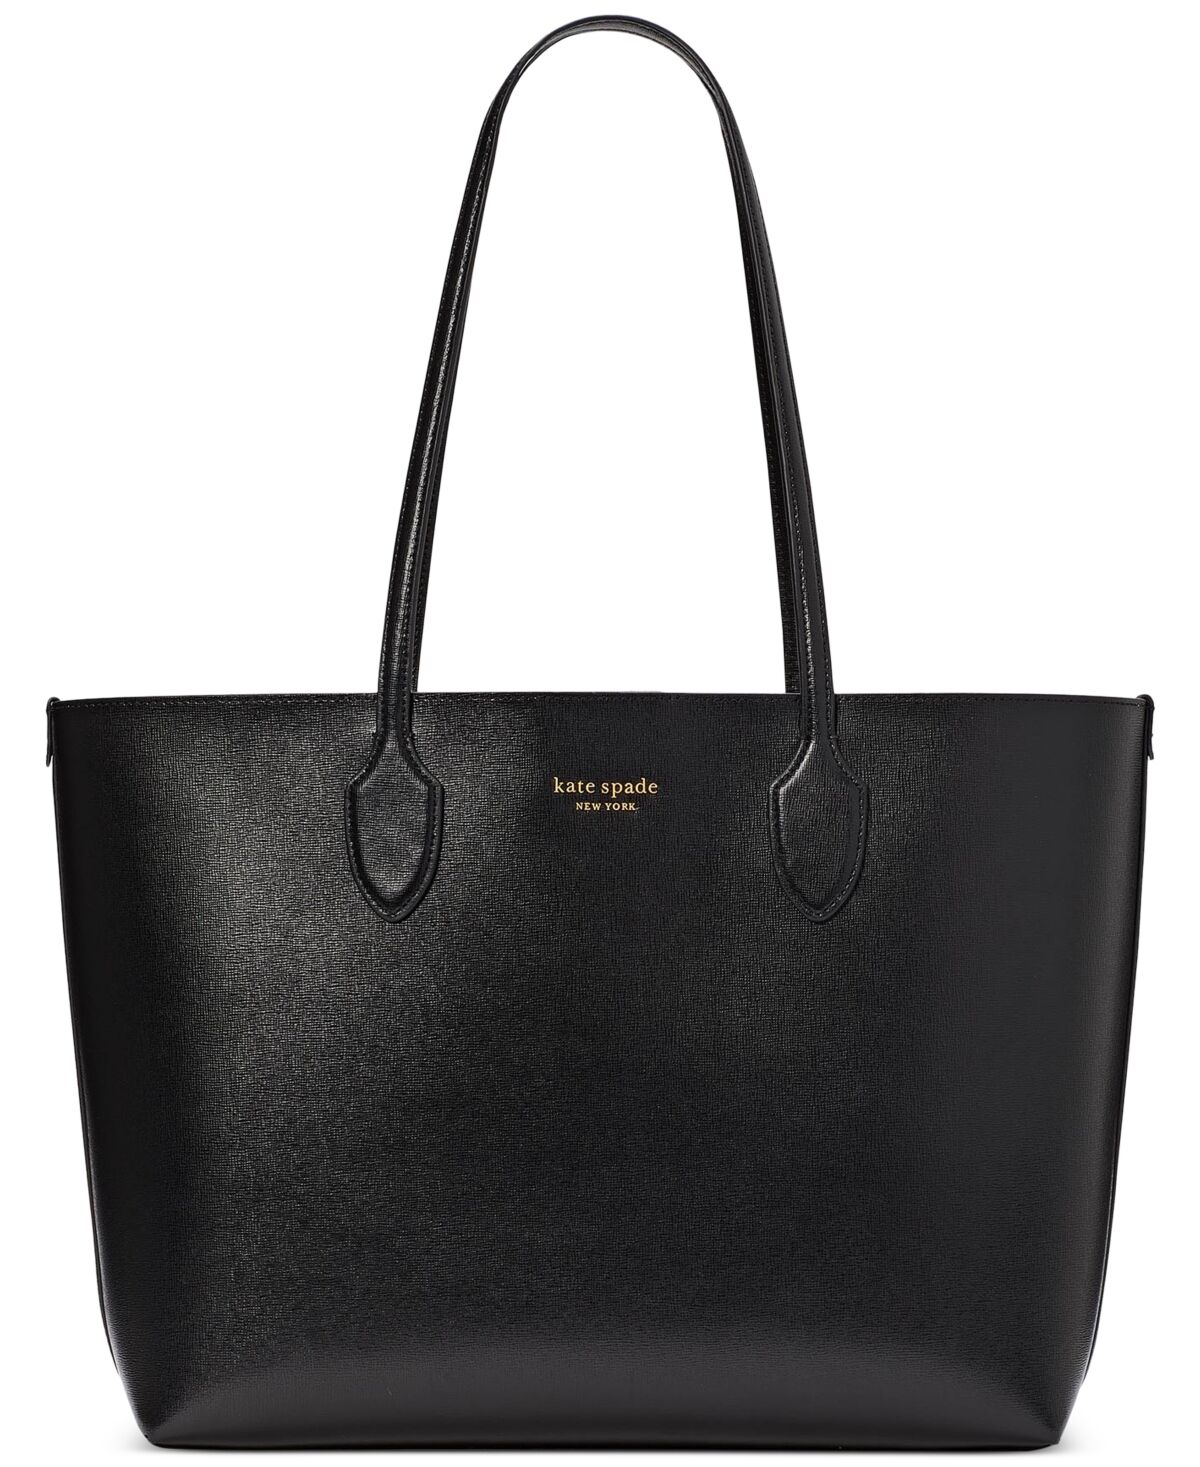 kate spade new york Bleecker Saffiano Leather Large Tote - Black